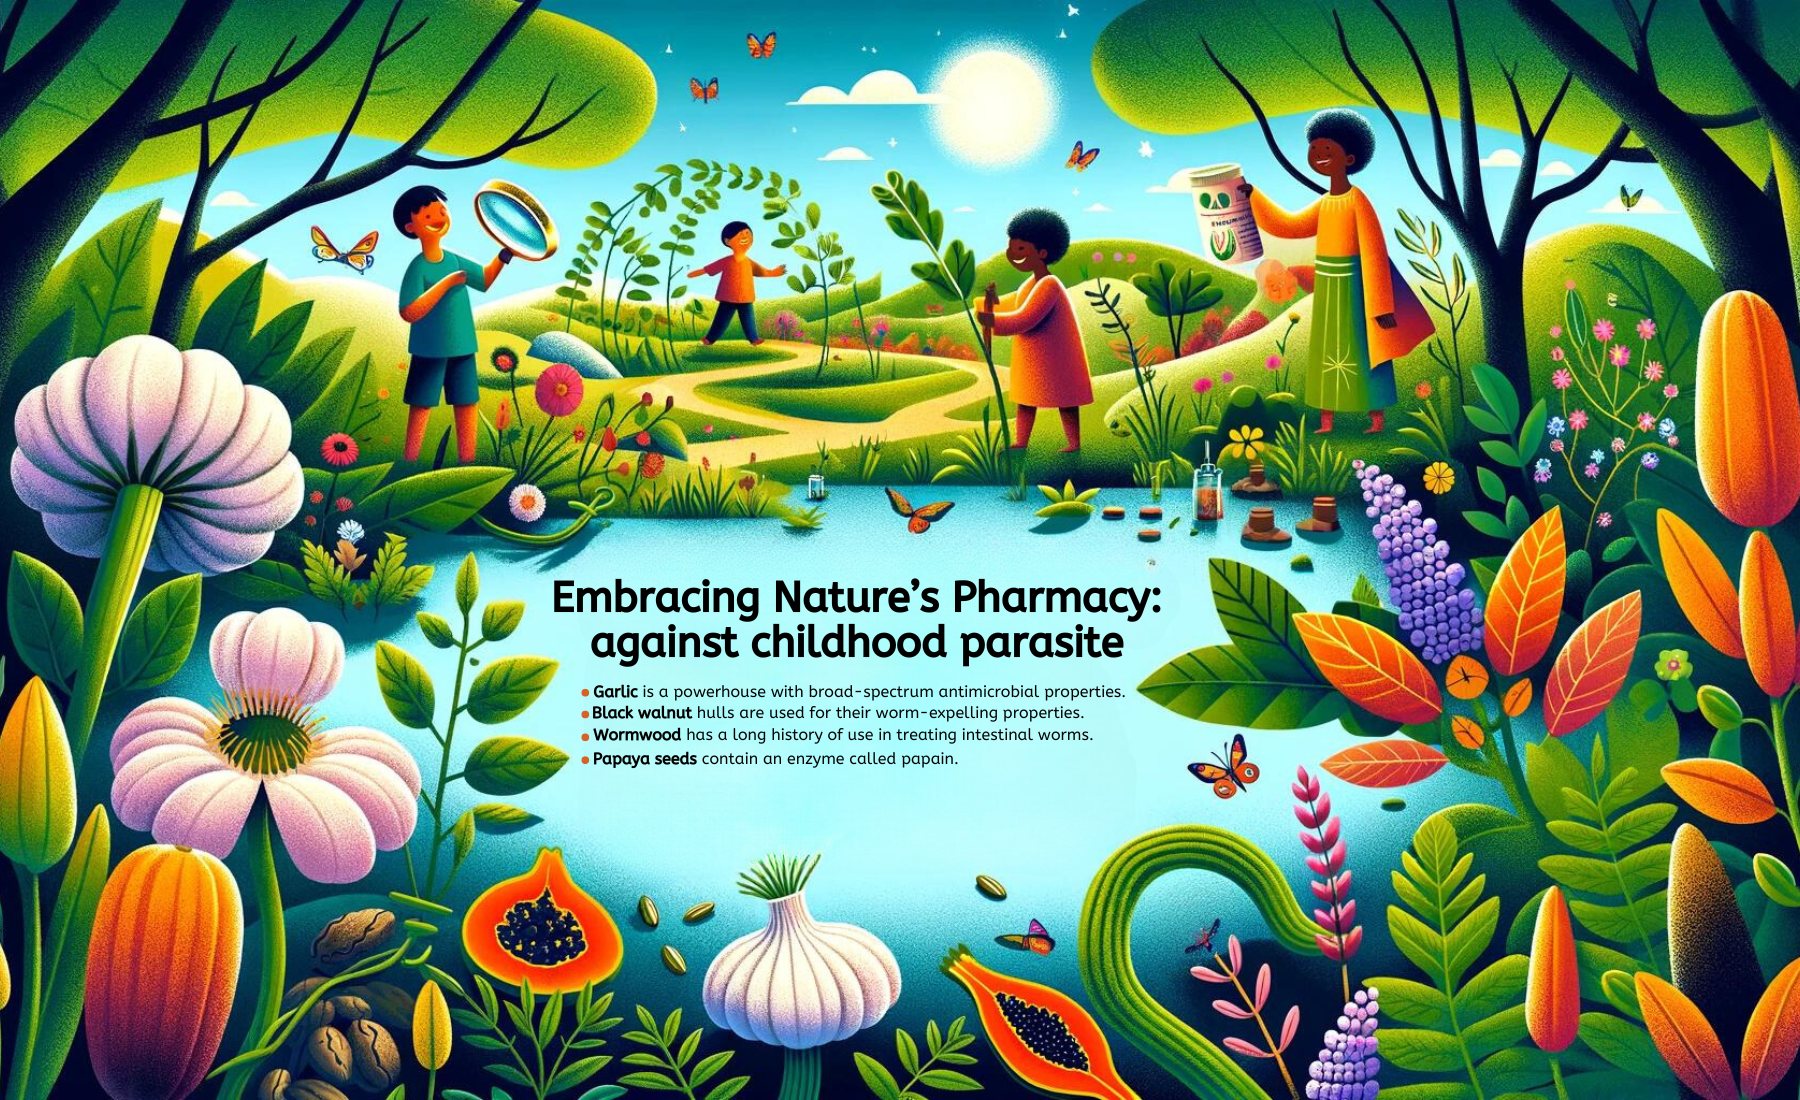 Embracing Nature's Pharmacy: Herbal Remedies Against Childhood Parasites